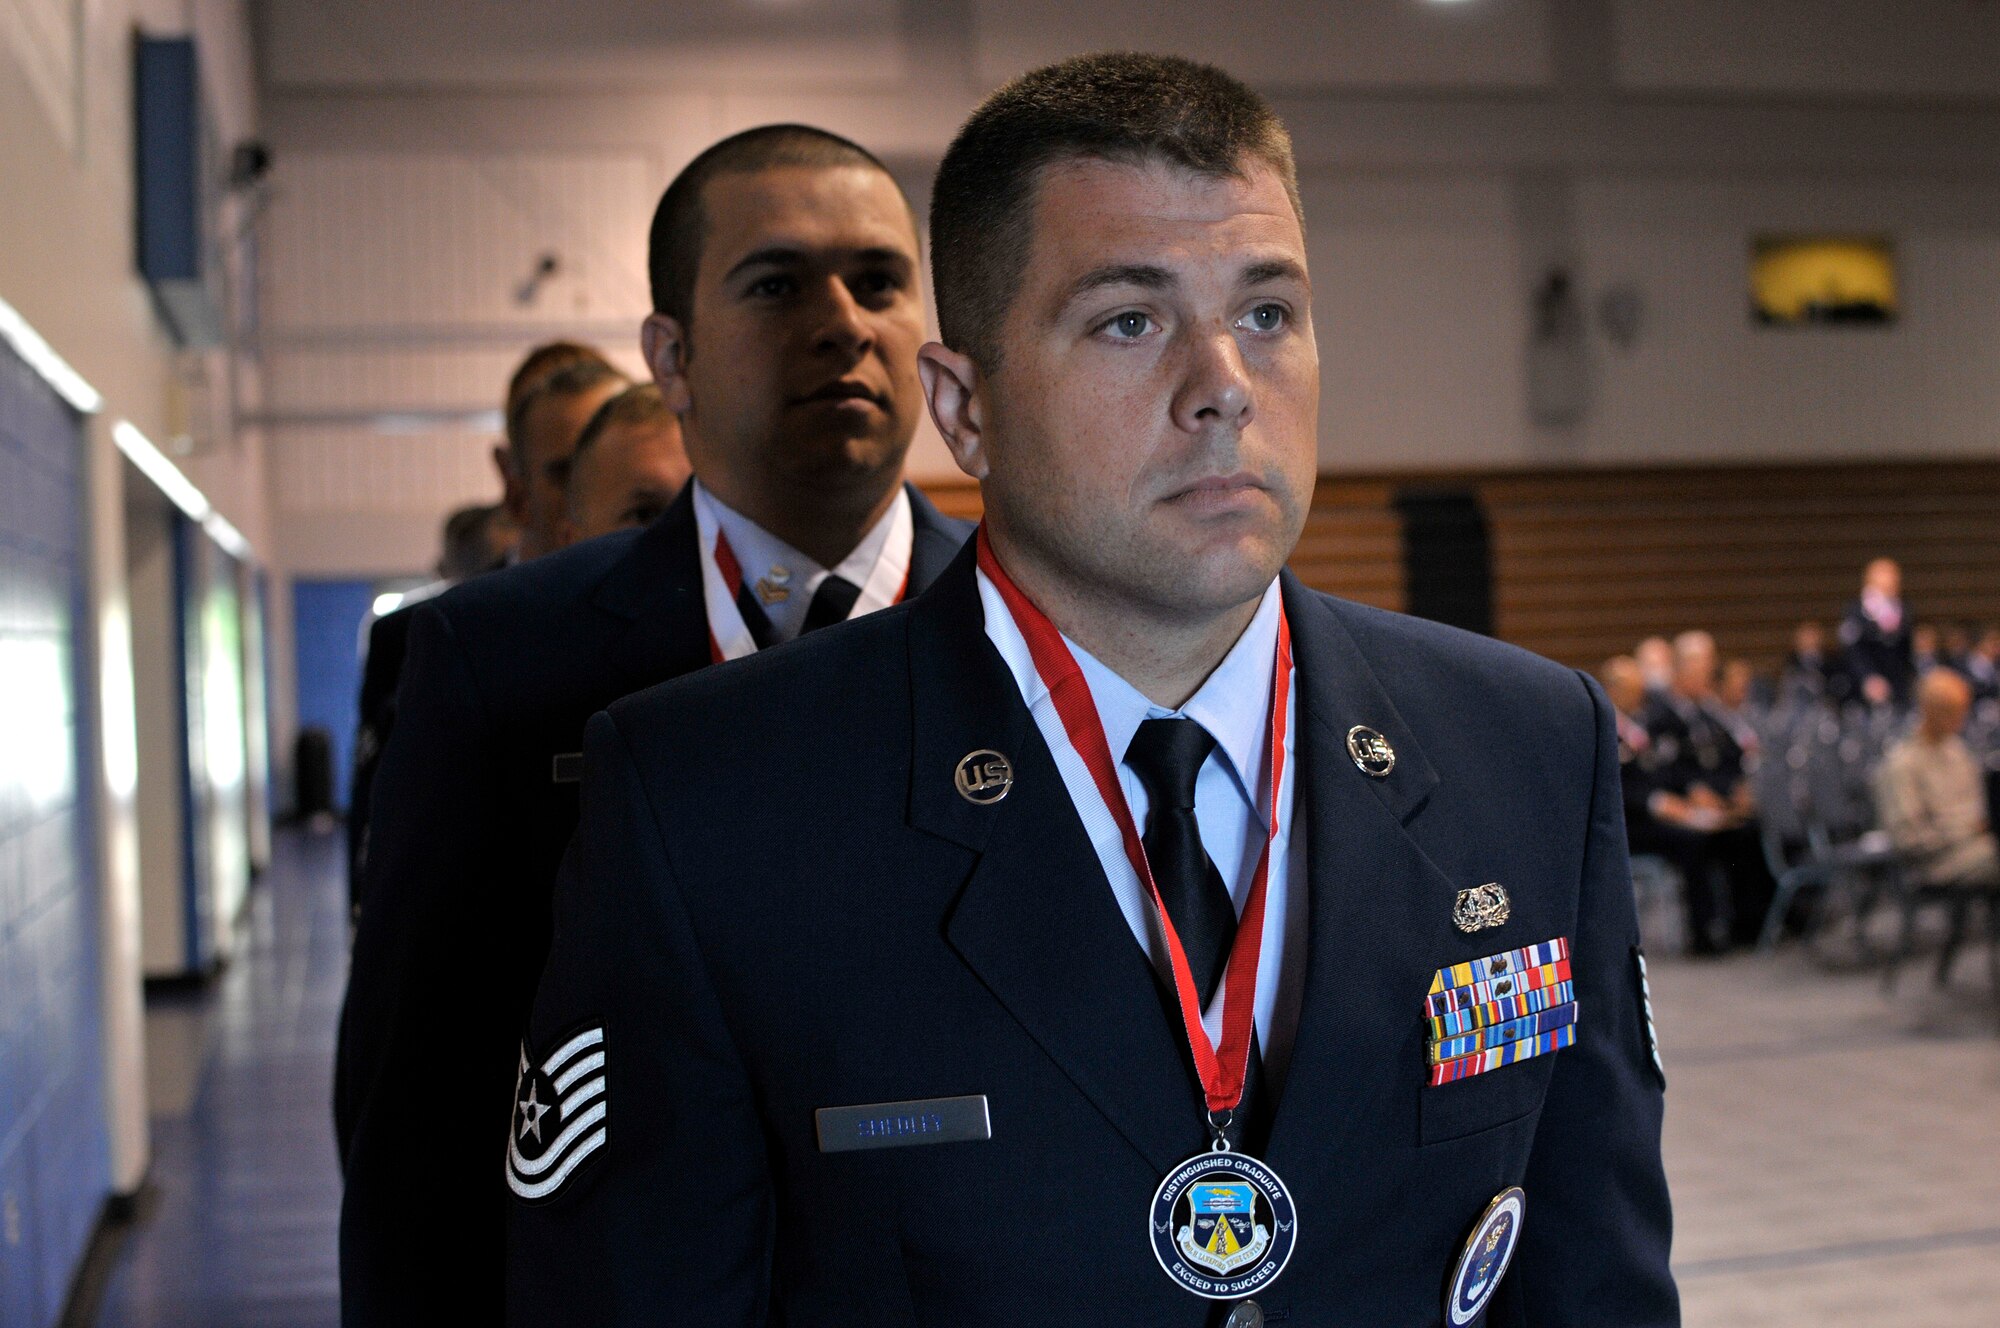 MCGHEE TYSON AIR NATIONAL GUARD BASE, Tenn. – U.S. Air National Guard Tech. Sgt. Sean Smedley, from Wisconsin, graduates Air Force Noncommissioned Officer Academy as a Distinguished Graduate here May 23, 2013, at the Paul H. Lankford Enlisted Professional Military Education Center. Smedley and others from his class joined Airman Leadership School graduates in the ceremony that featured guest speaker Chief Master Sgt. Richard A. "Andy" Kaiser, command chief of U.S. Air Force Air Mobility Command. (U.S. Air National Guard photo by Master Sgt. Mike R. Smith/Released)